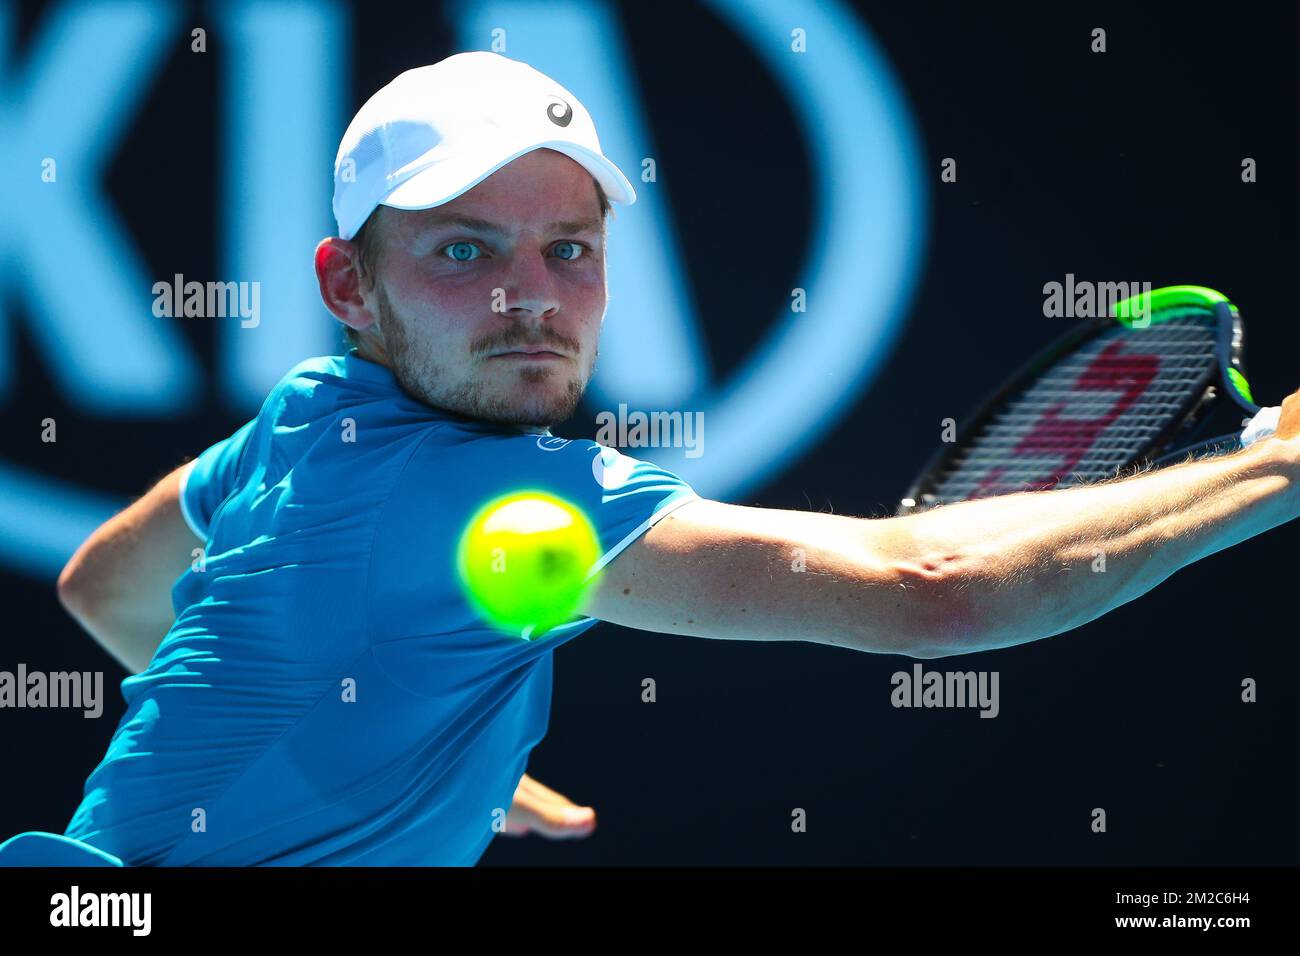 David Goffin in action at a tennis game between Belgian David Goffin (ATP  7) and German Matthias Bachinger (ATP 184), in the first round of the men's  singles tournament at the 'Australian